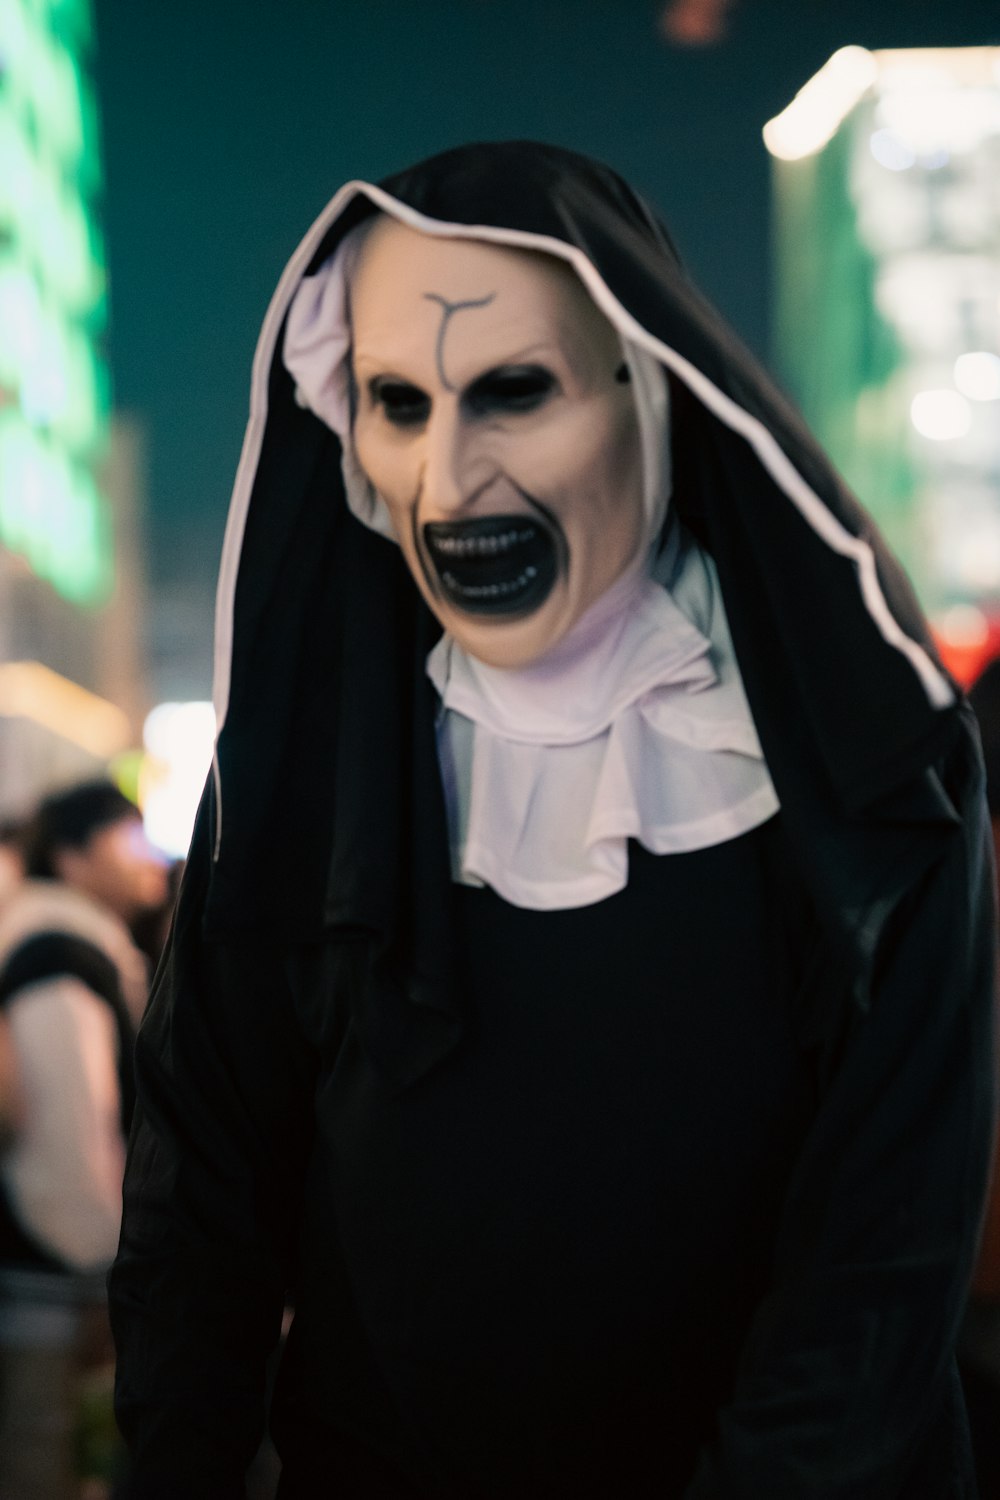 a man wearing a creepy mask and black outfit